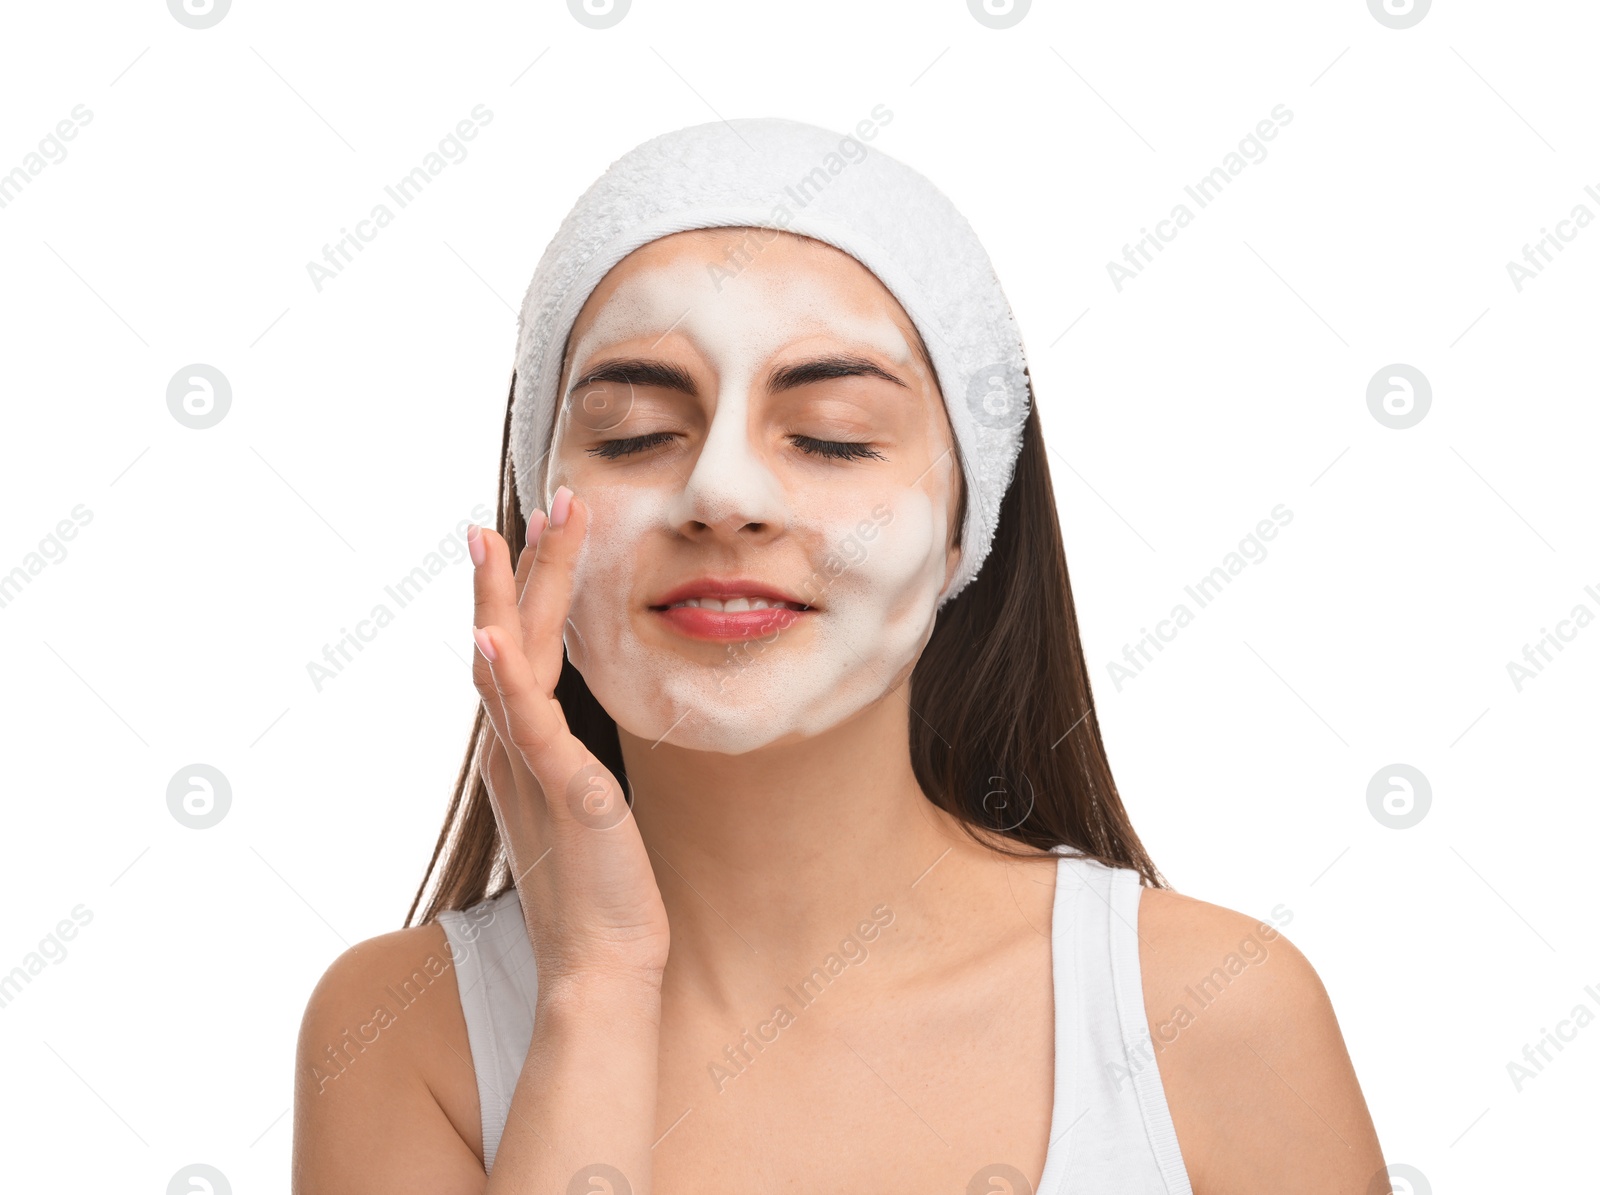 Photo of Young woman with headband washing her face on white background